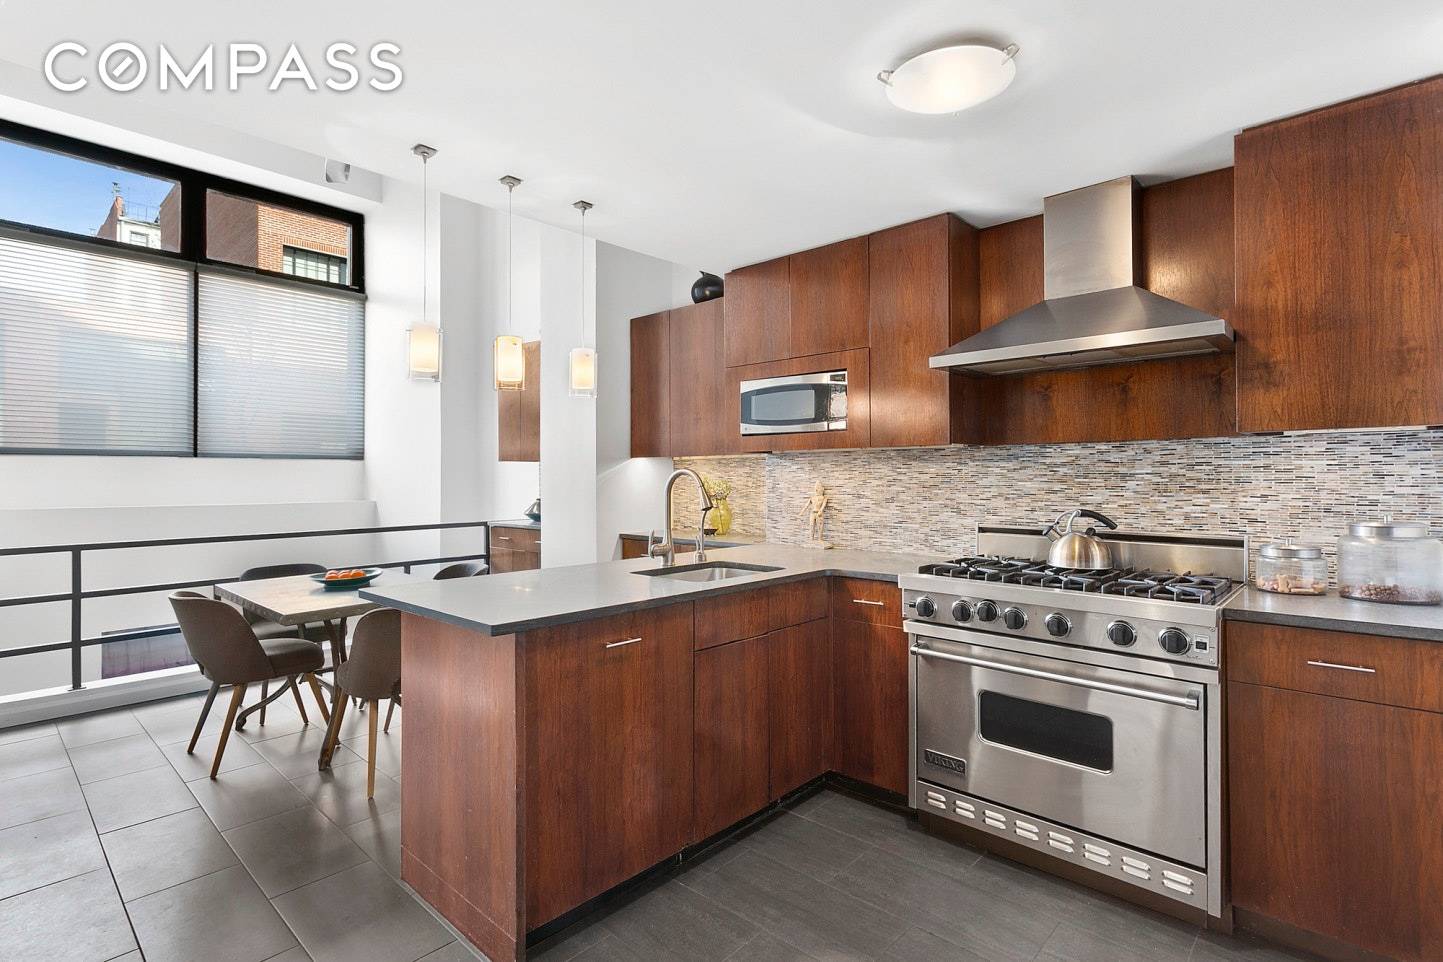 This is the West Village gem you have always dreamed of.